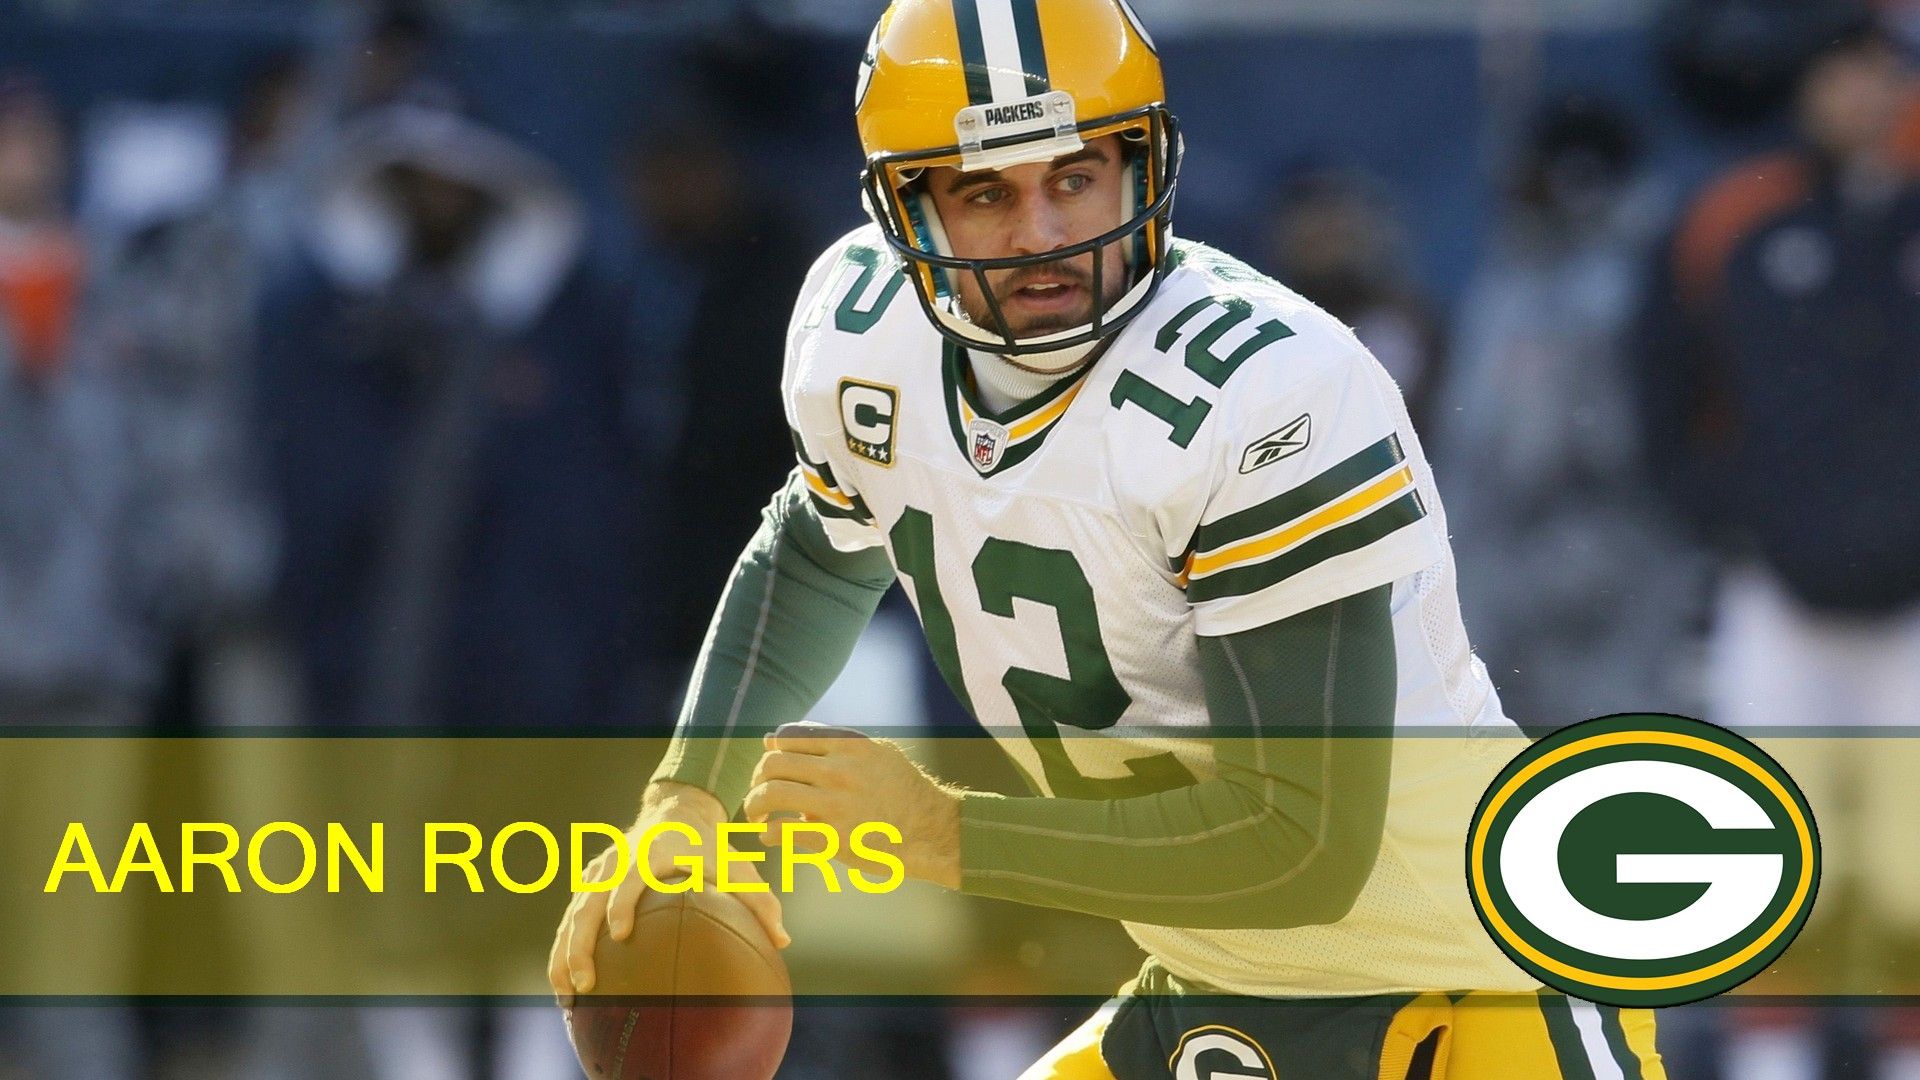 Gallery for - aaron rodgers wallpaper 2013